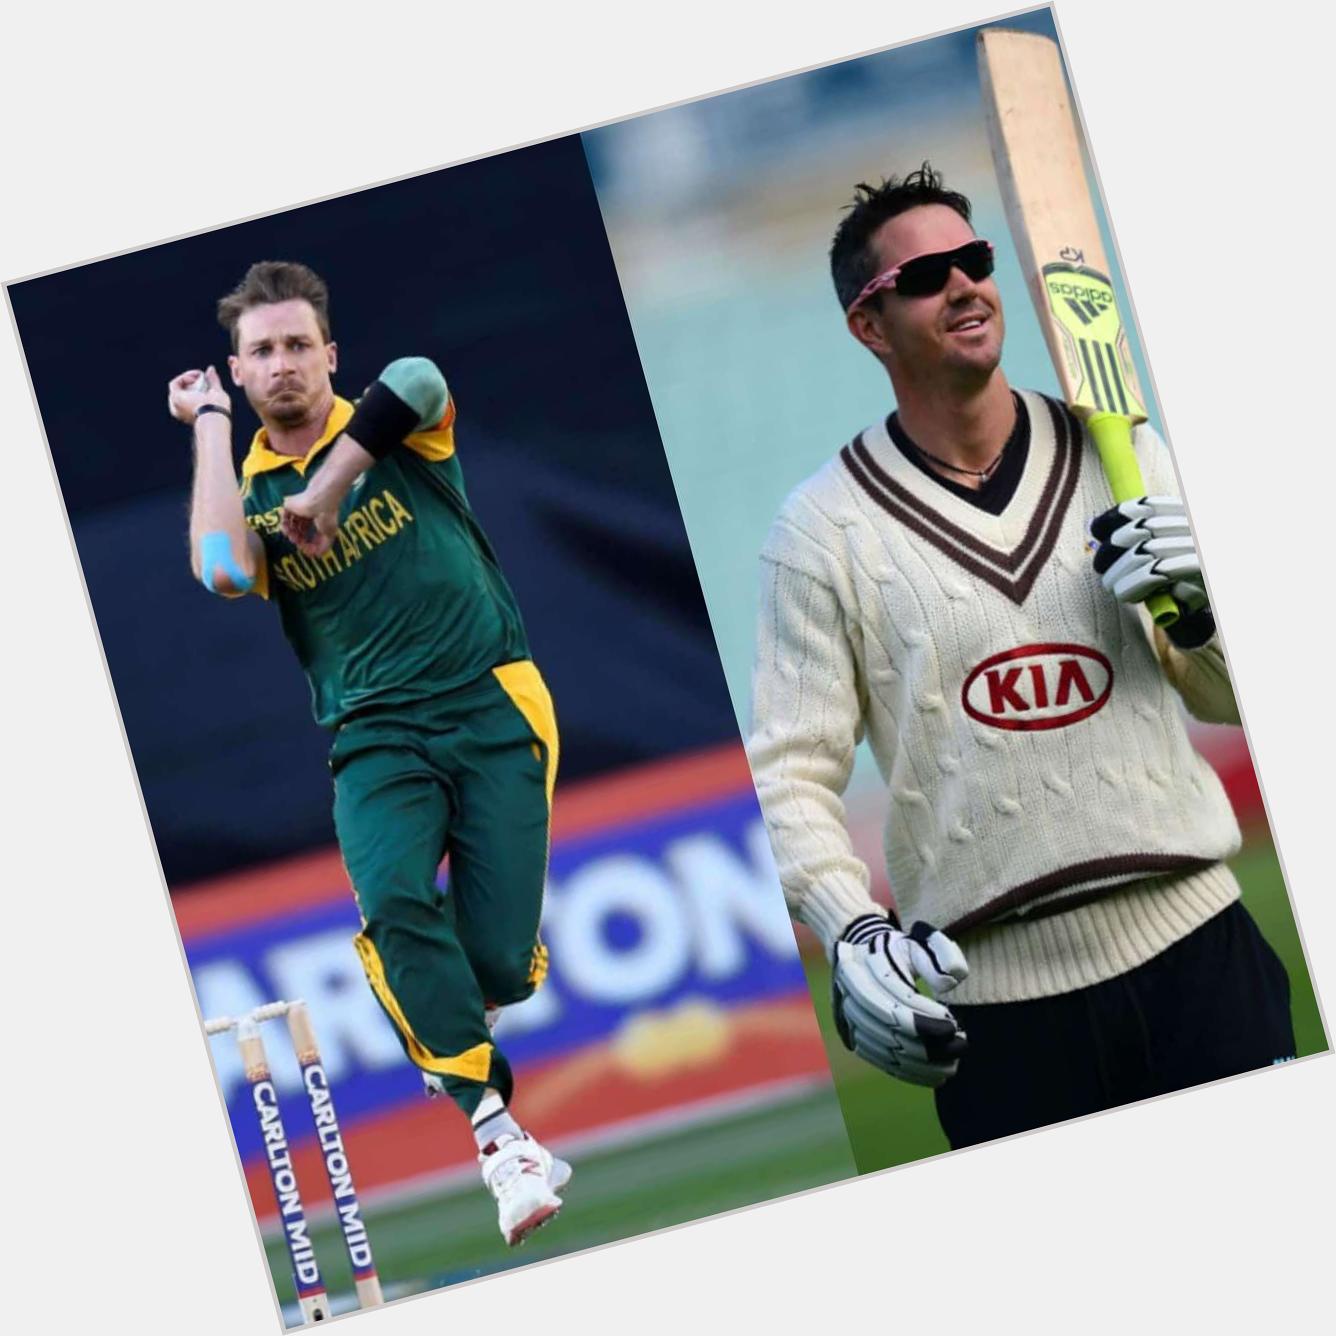 Happy birthday  Dale Steyn and KP ..Both are my fav cricketers..  